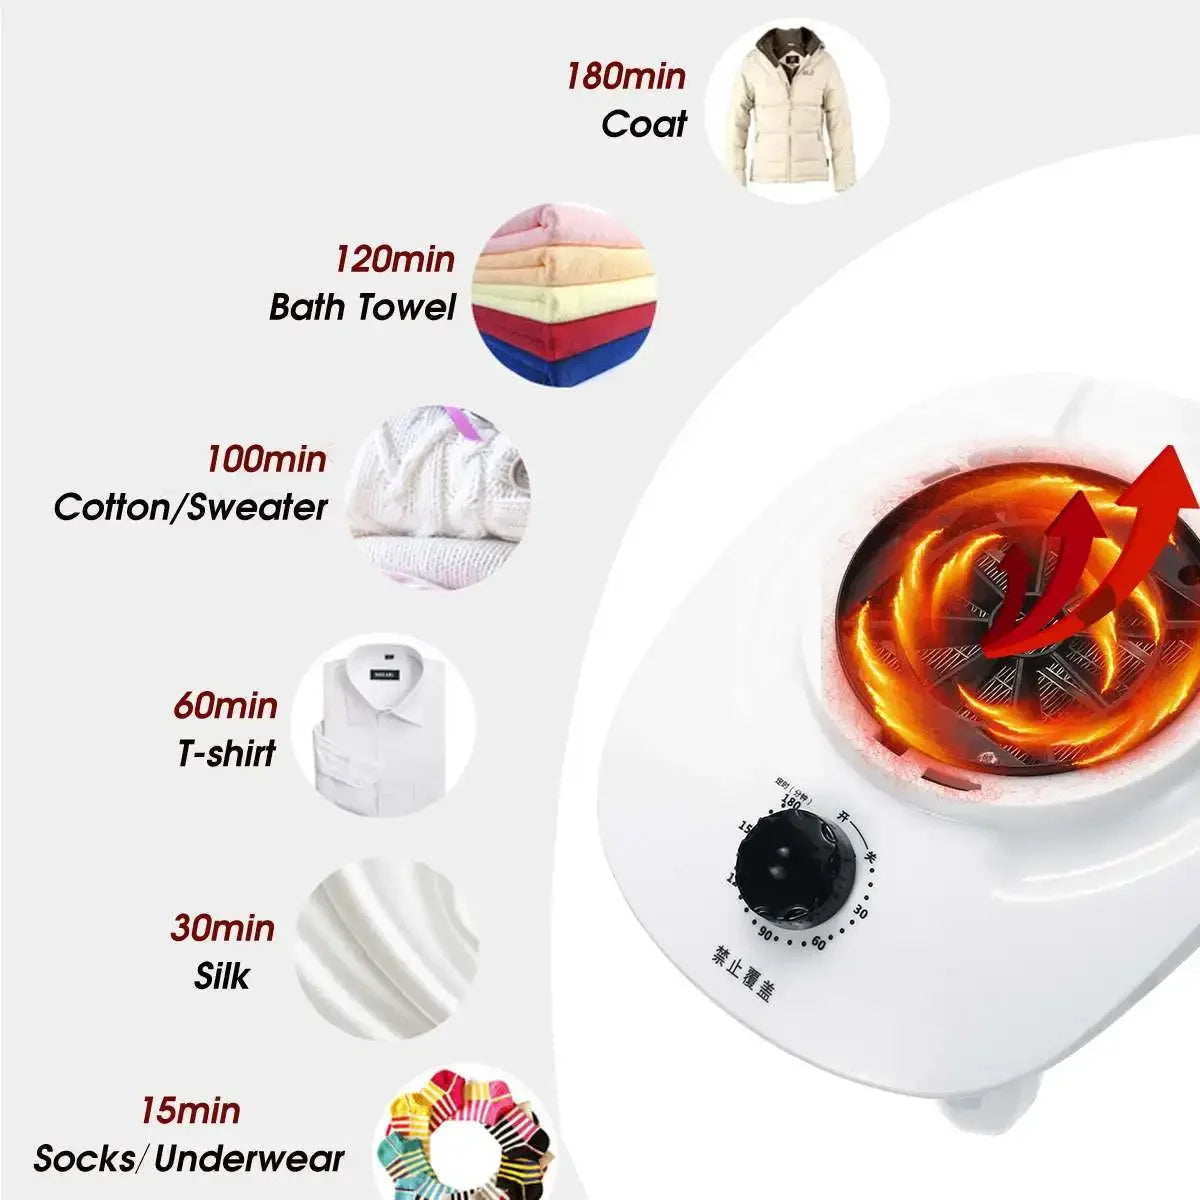 Electric Clothes Dryer
Portable Warm Air Dryer
Fast Heating Laundry Hanger
Shoe Dryer